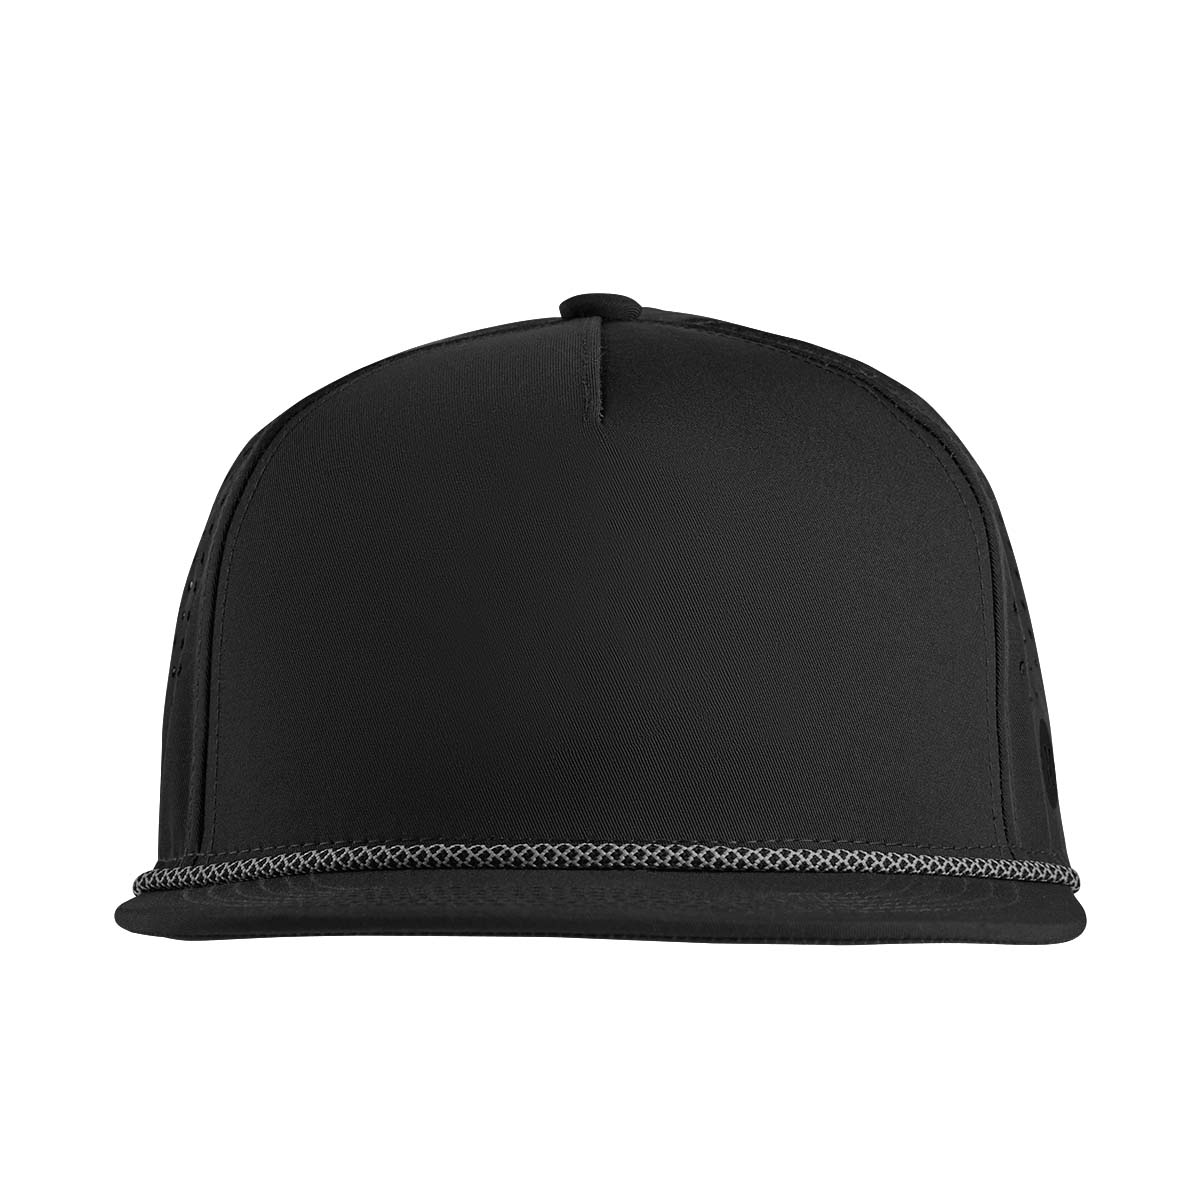 Black Snapback -Blank for a Comfortable Fit. - Mammoth Headwear